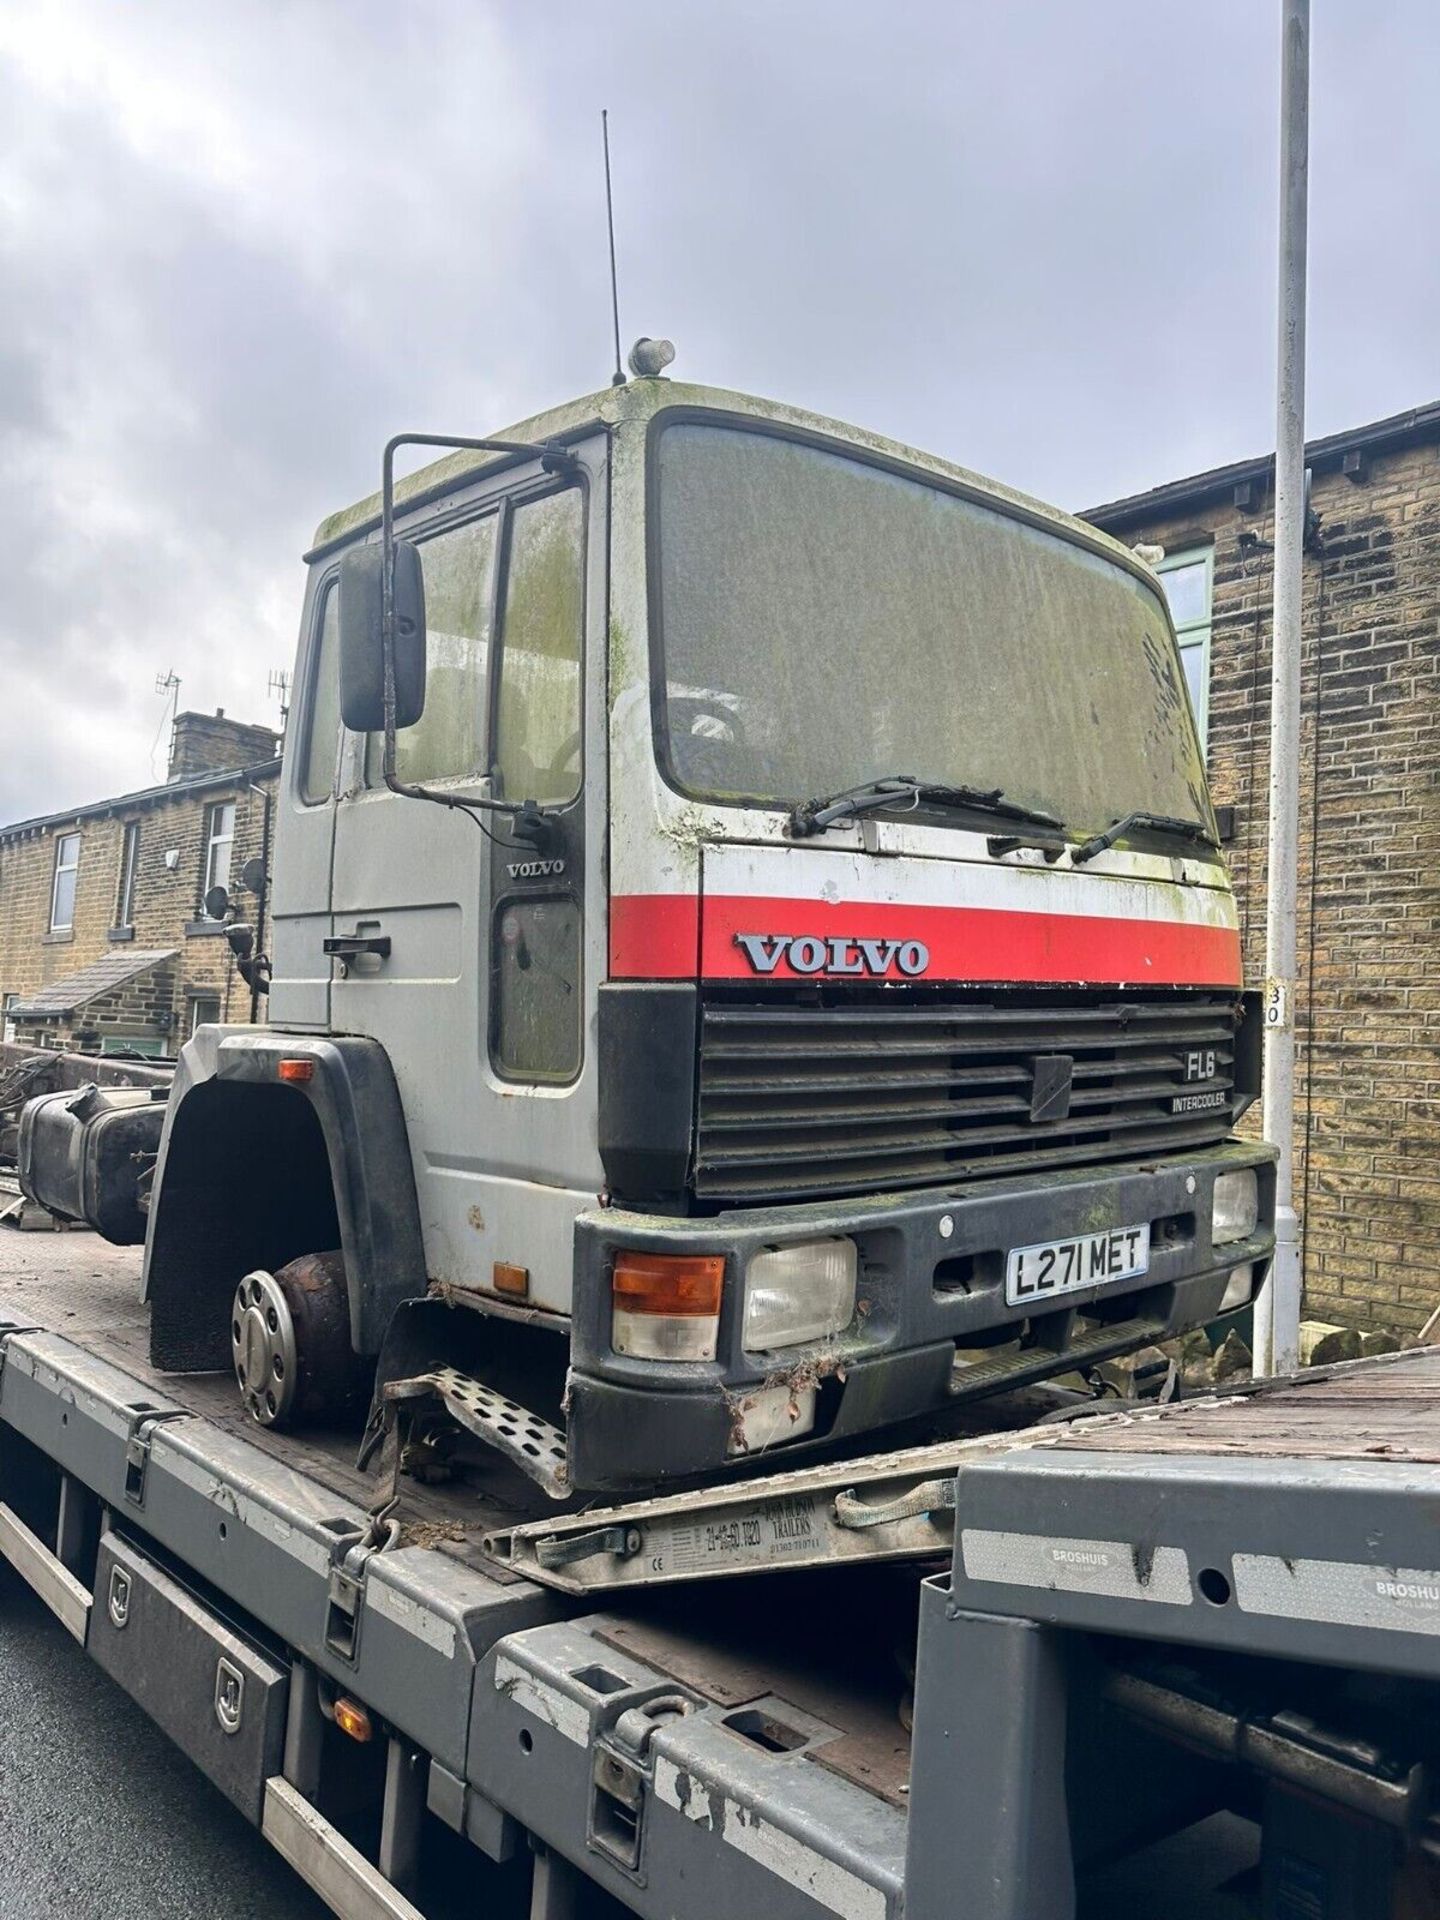 1994 VOLVO FL6 14-TON CHASSIS CAB - ESSENTIAL COMPONENTS INCLUDED